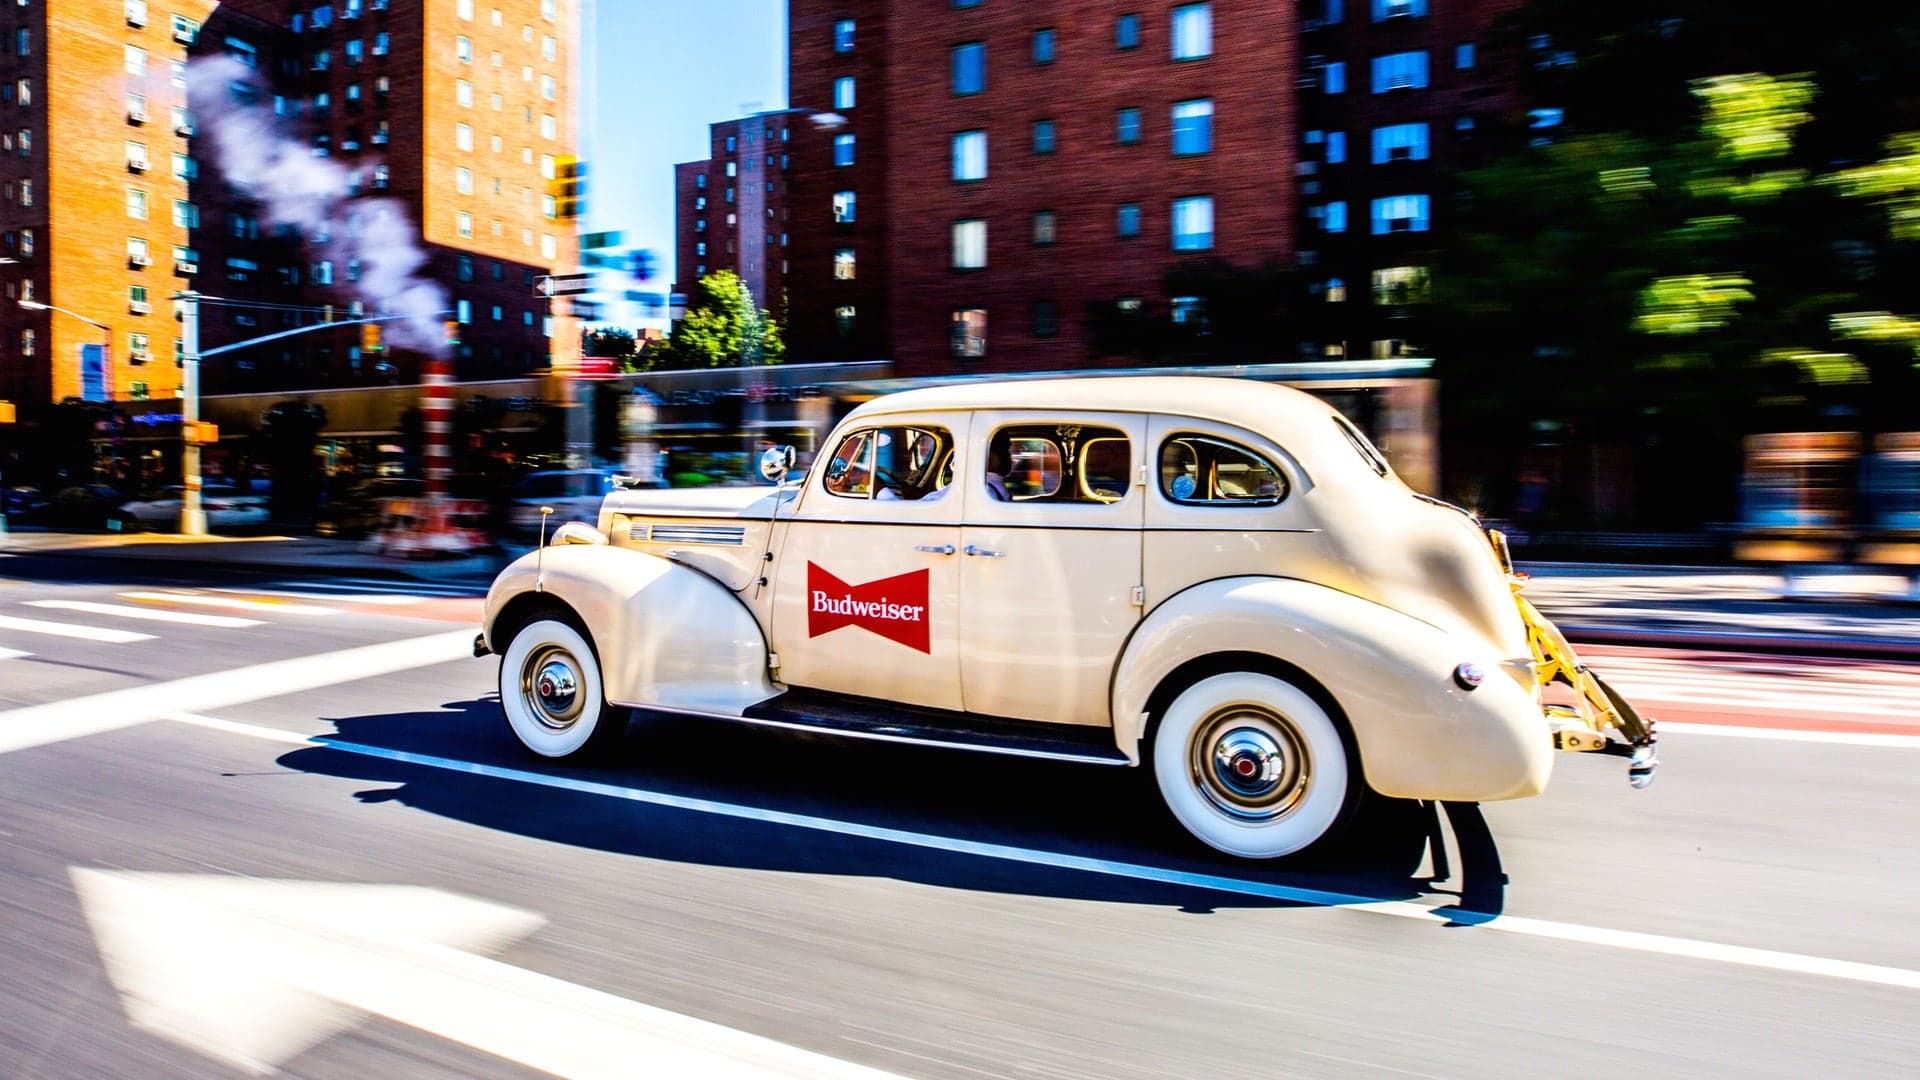 Lyft, Budweiser to Roll Out Vintage Cars in New York City This Wednesday